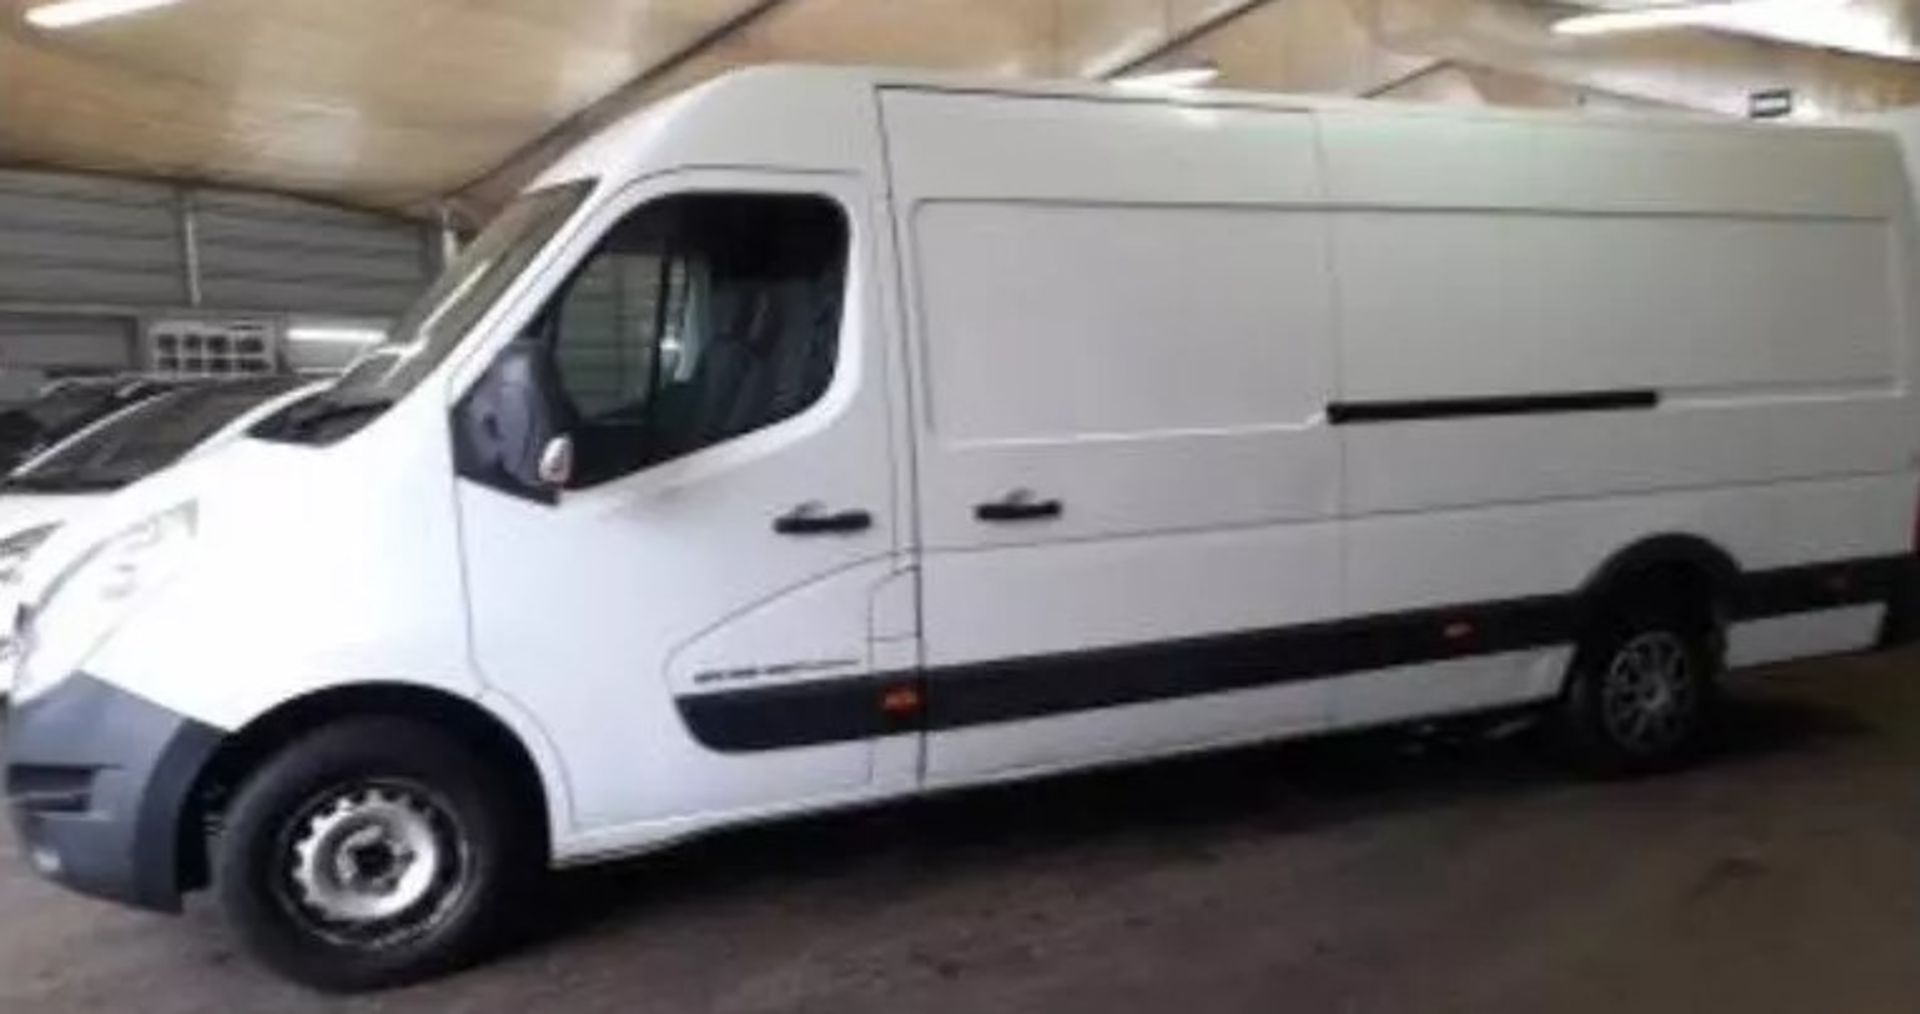 2015 RENAULT MASTER LM35 DCI 135 - Image 3 of 11